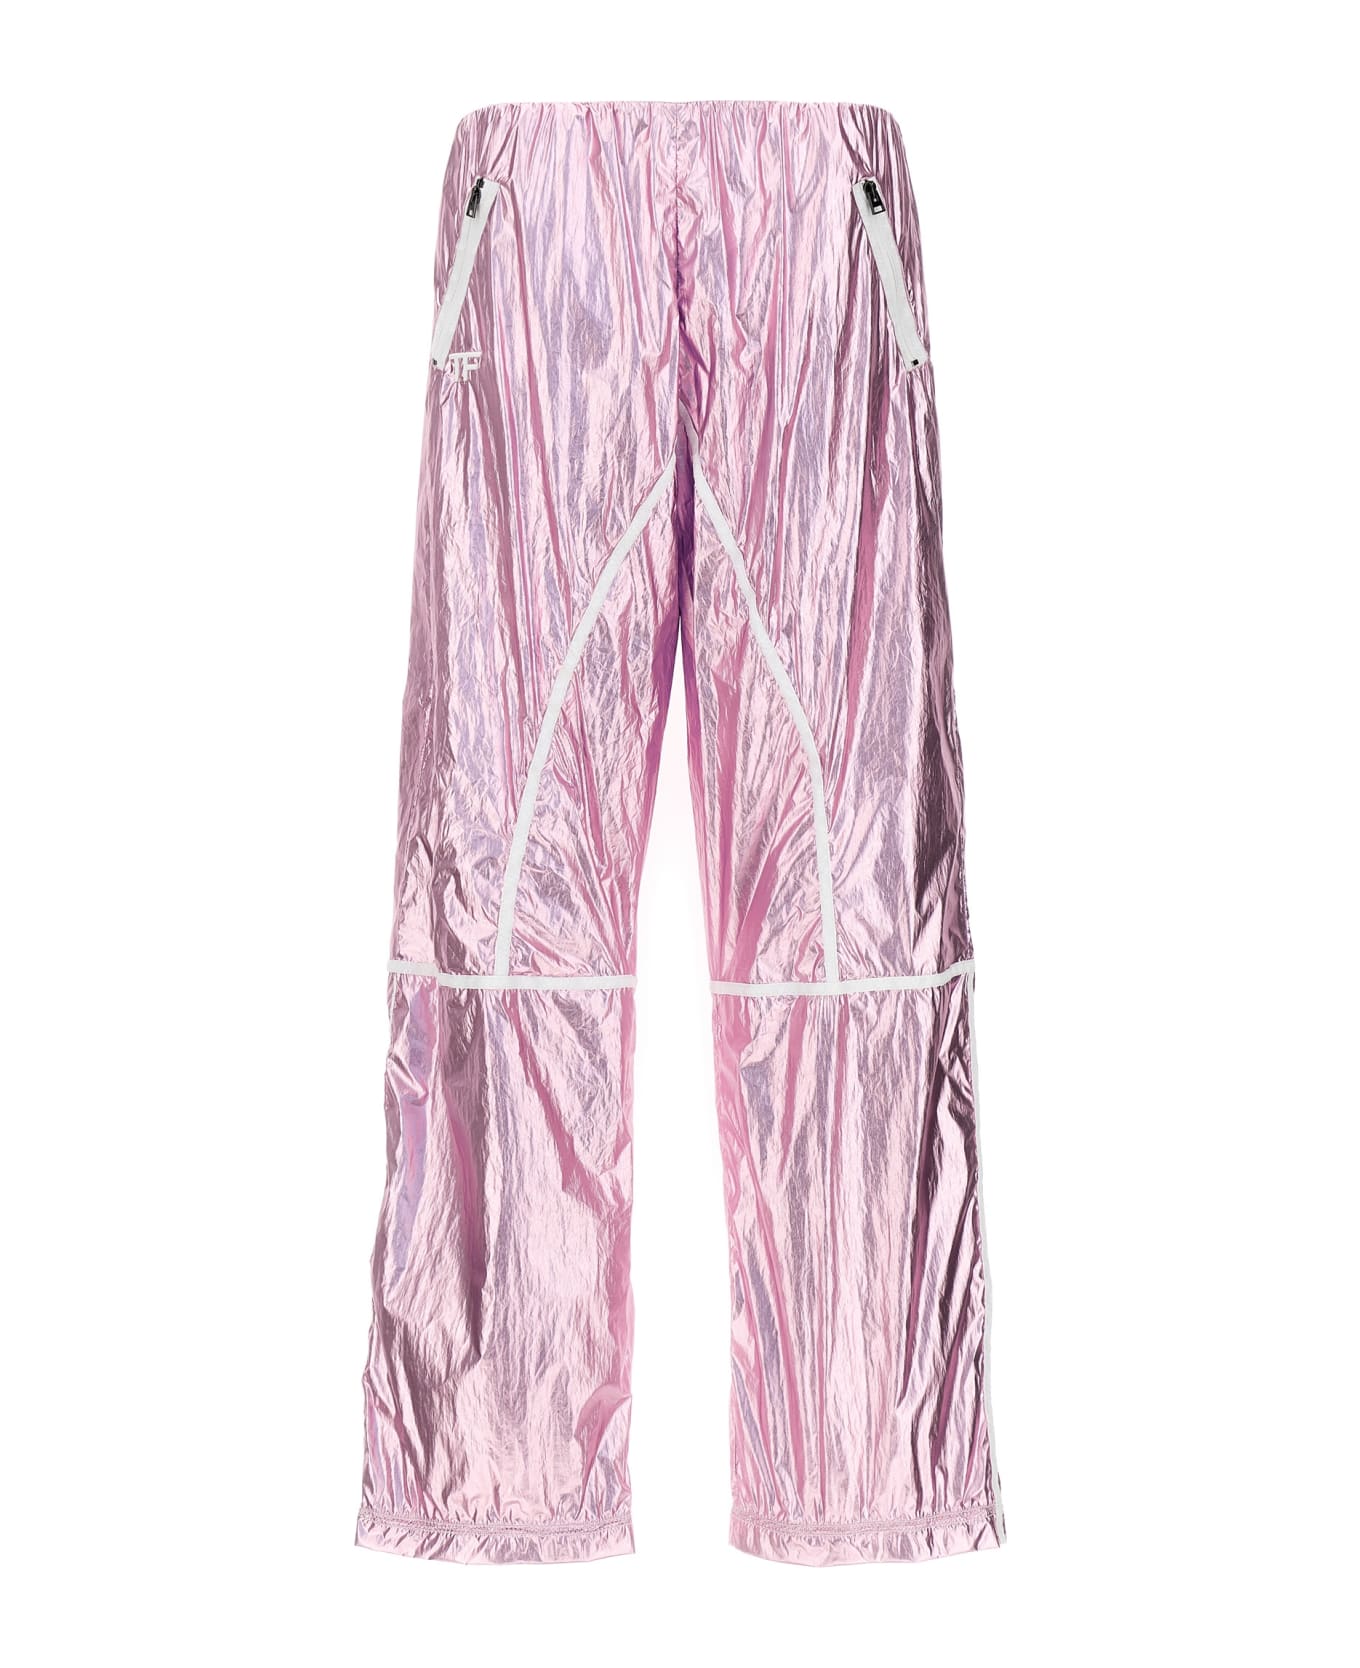 Tom Ford Laminated Track Pants - Pink